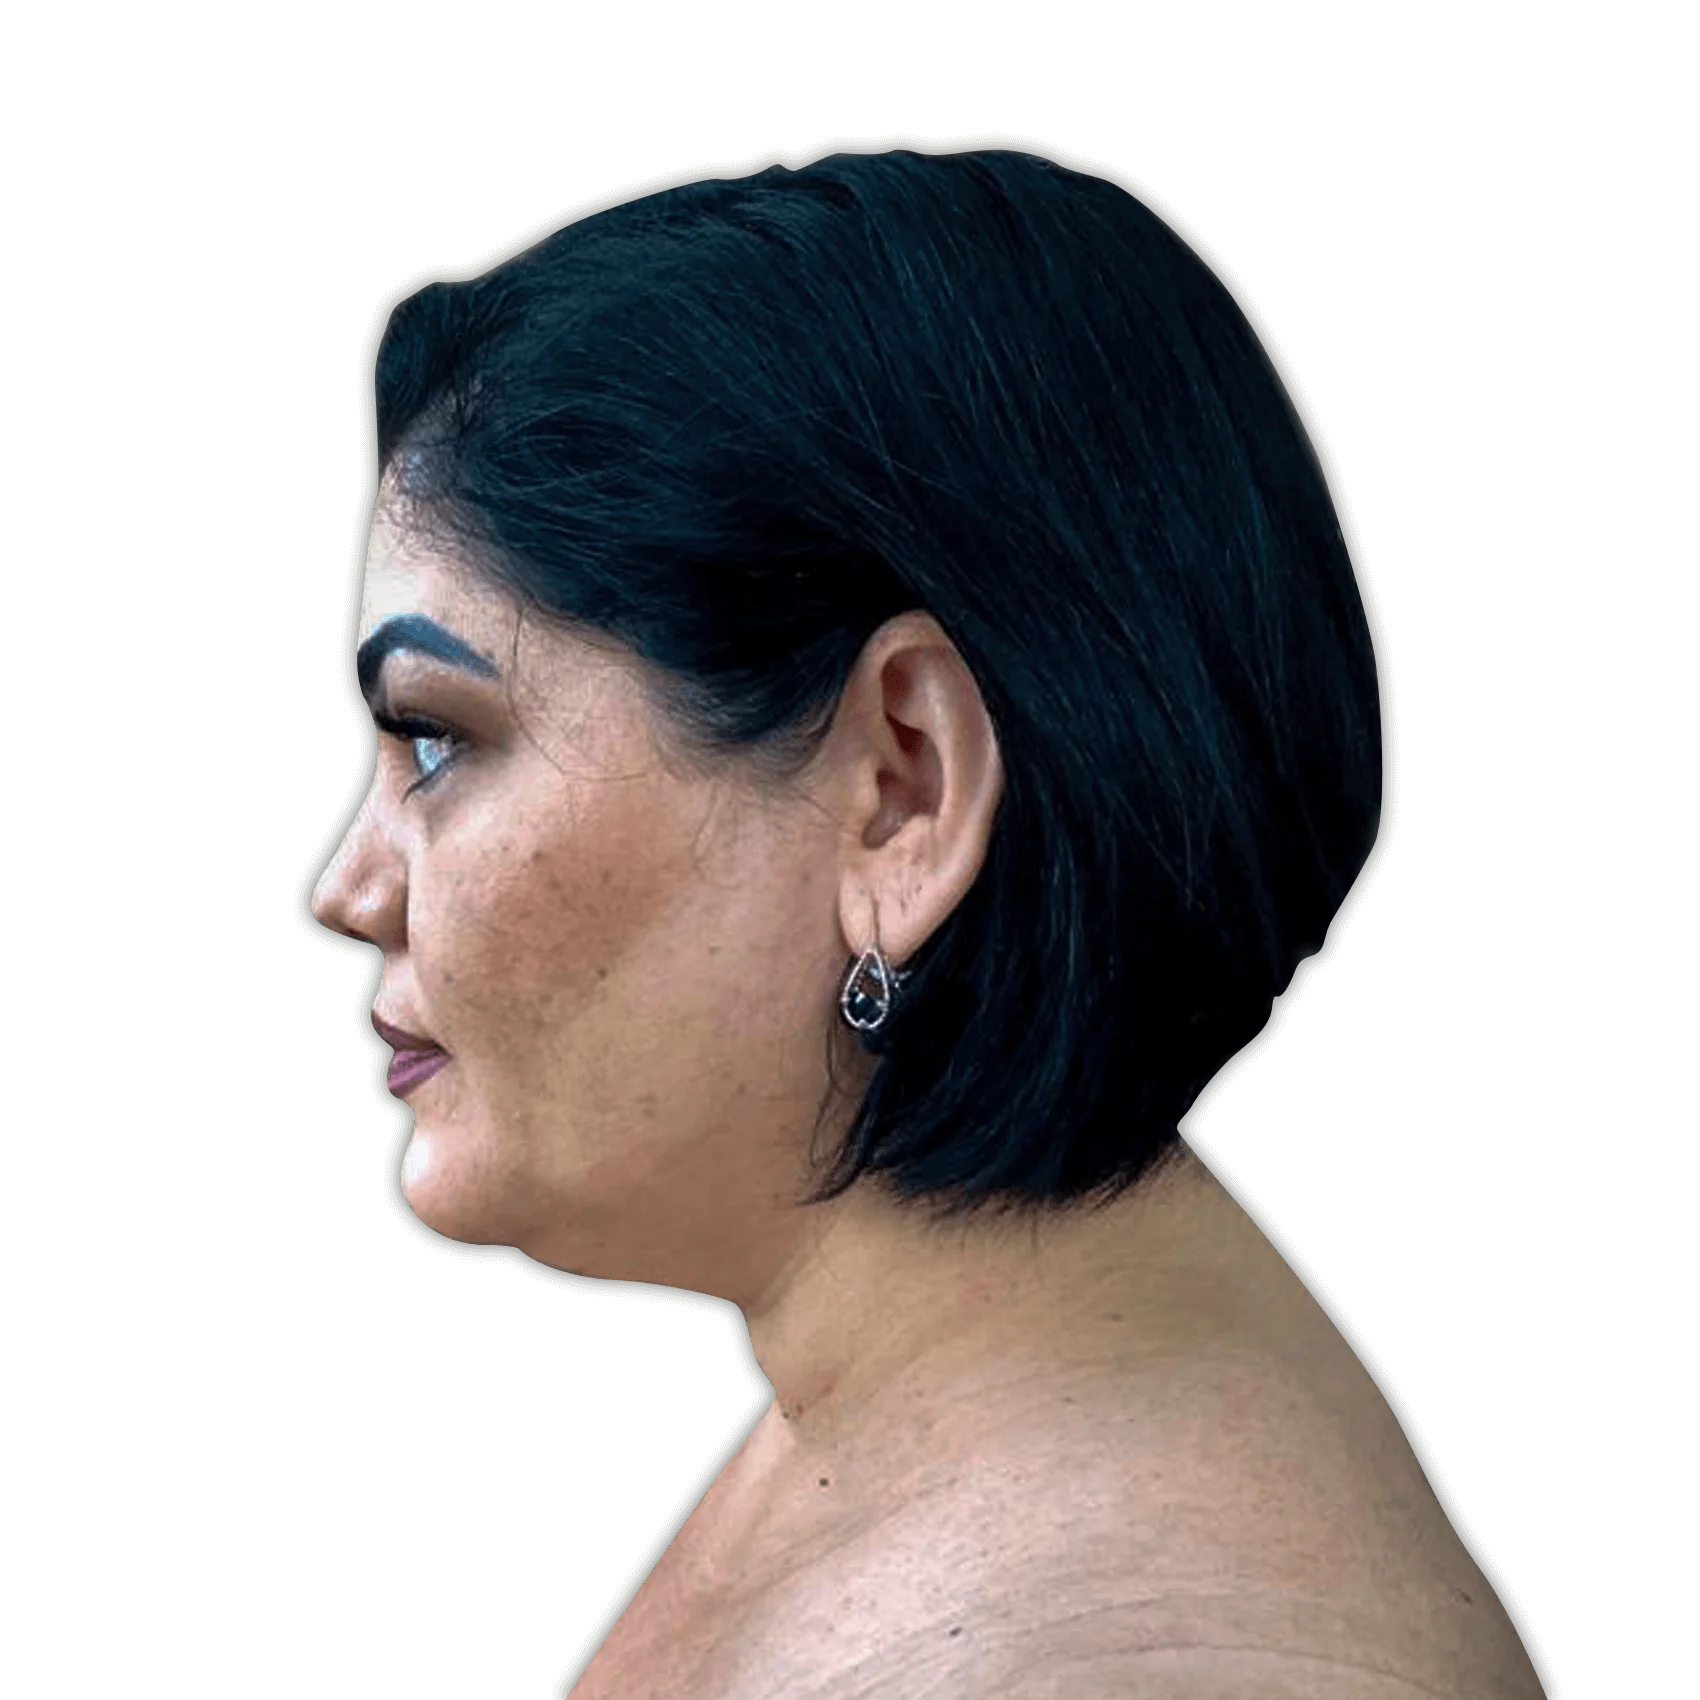 After Neck Liposuction Surgery